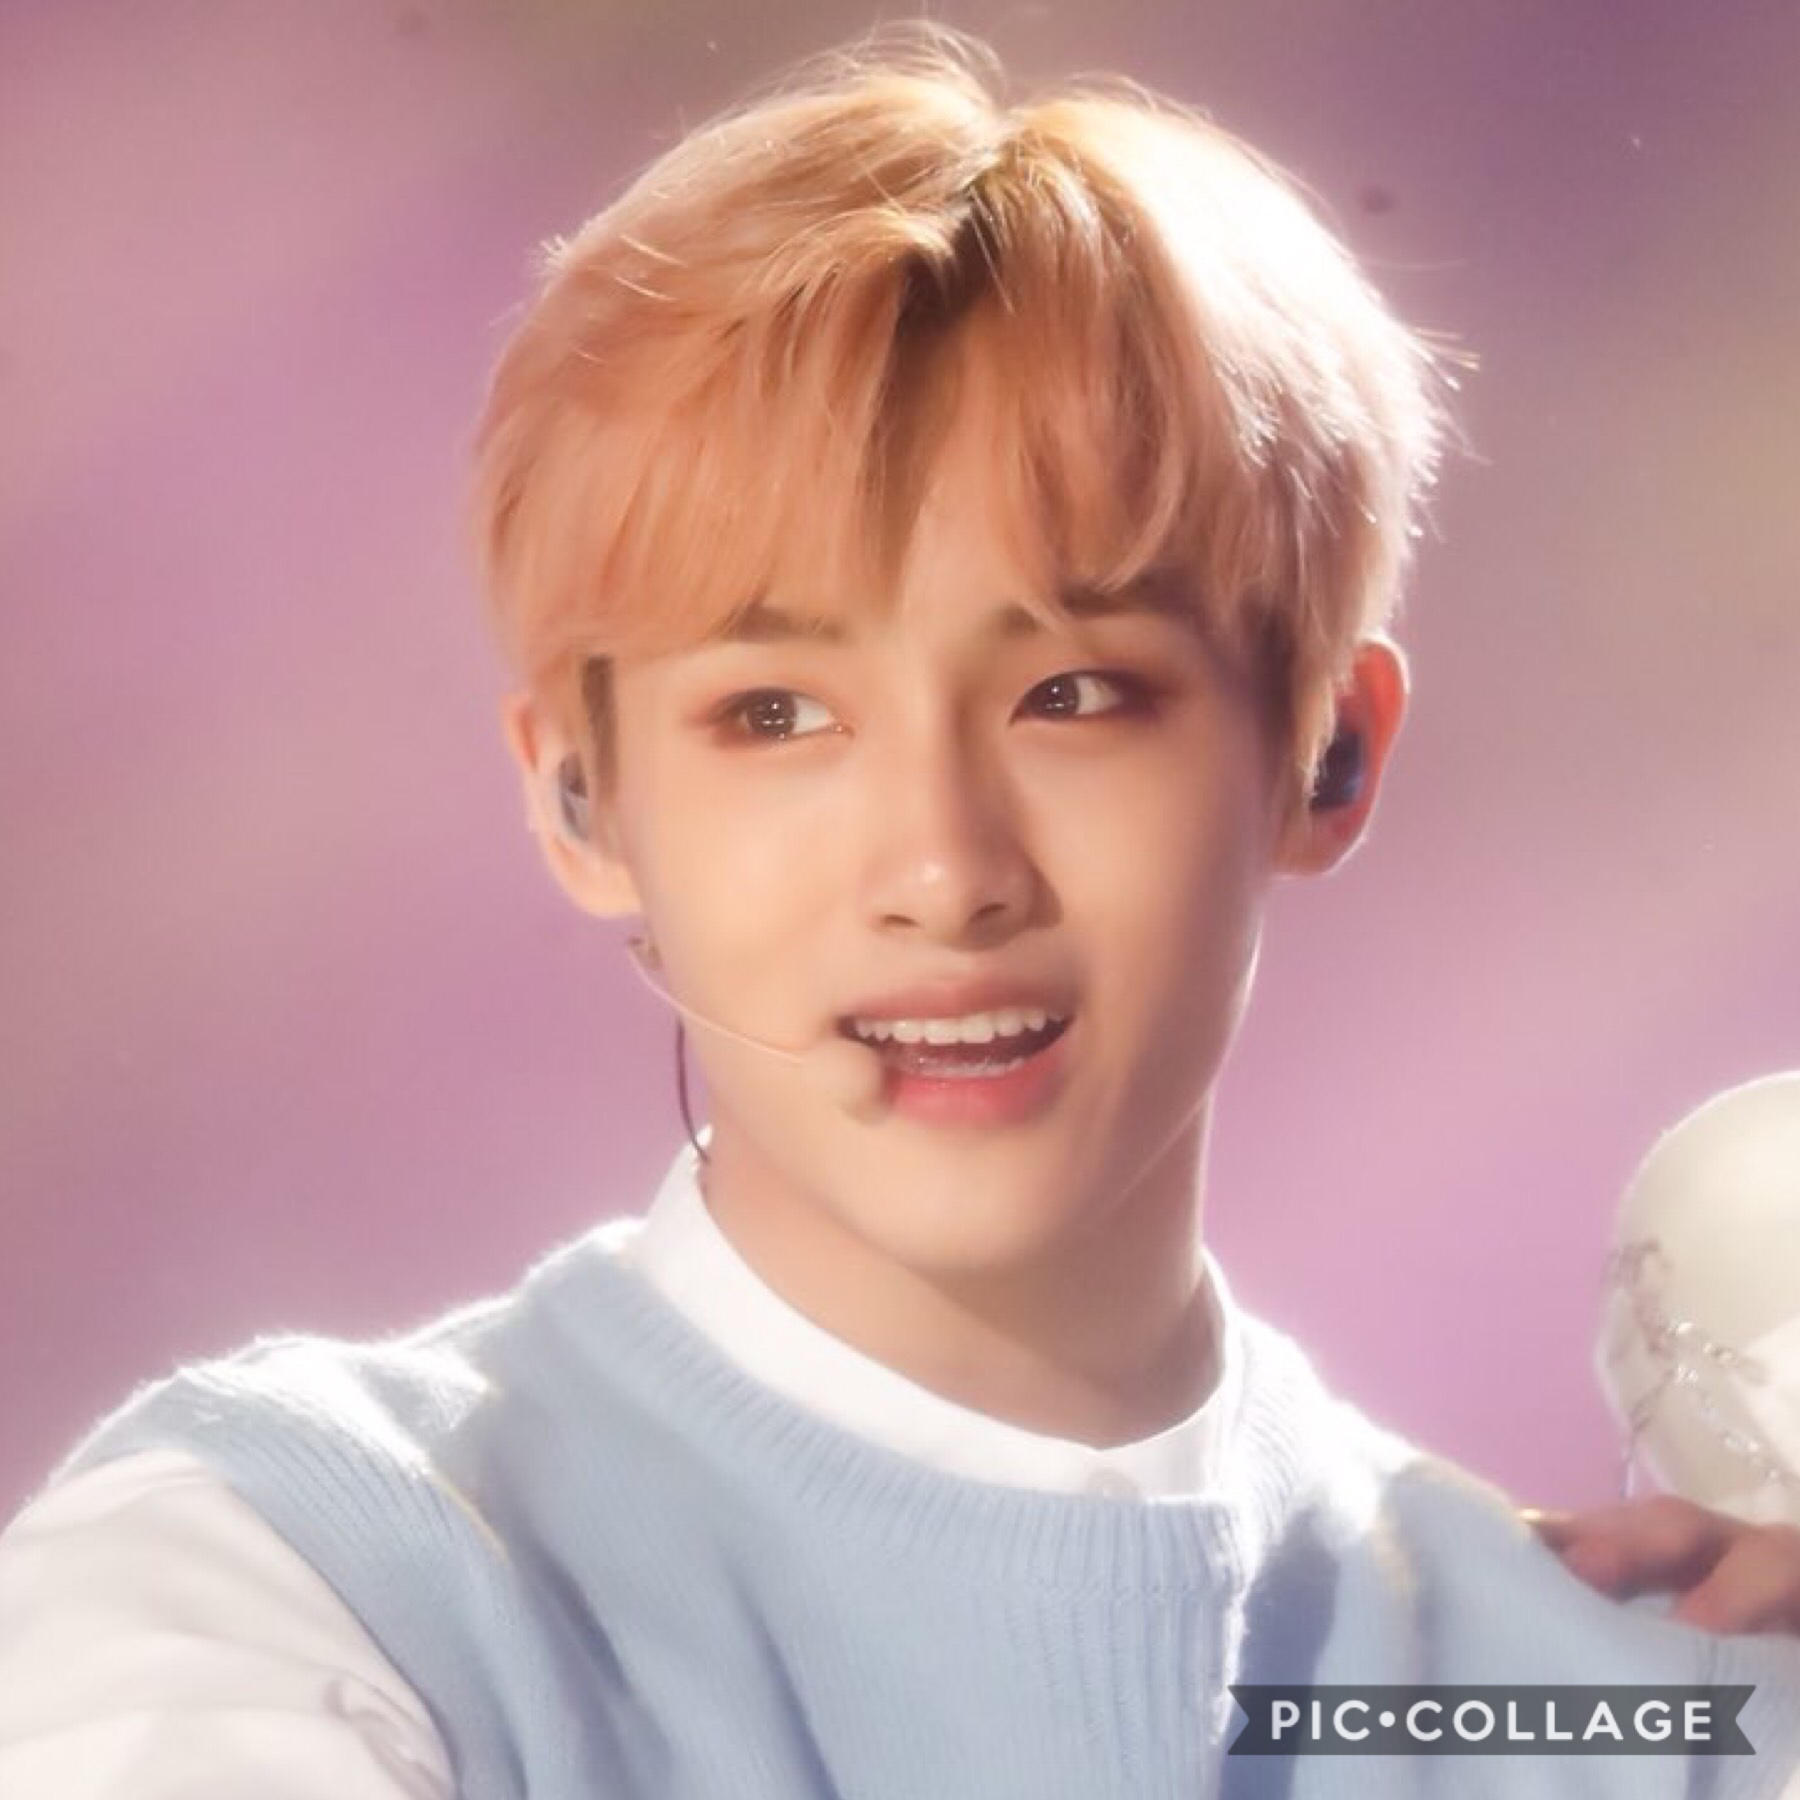 〔 𝑇𝑎𝑝 𝑚𝑒 〕
⁺ Newish theme ig lol anyways I’ve kind of started an edit but I’m in a “writers block” phase rn :’)
⁺ WINWIN is so beautiful I can’t- but 𝑠𝑡𝑎𝑛 𝑛𝑐𝑡!
˖ also hugeeee s/o to all those ppl that are active on my acc